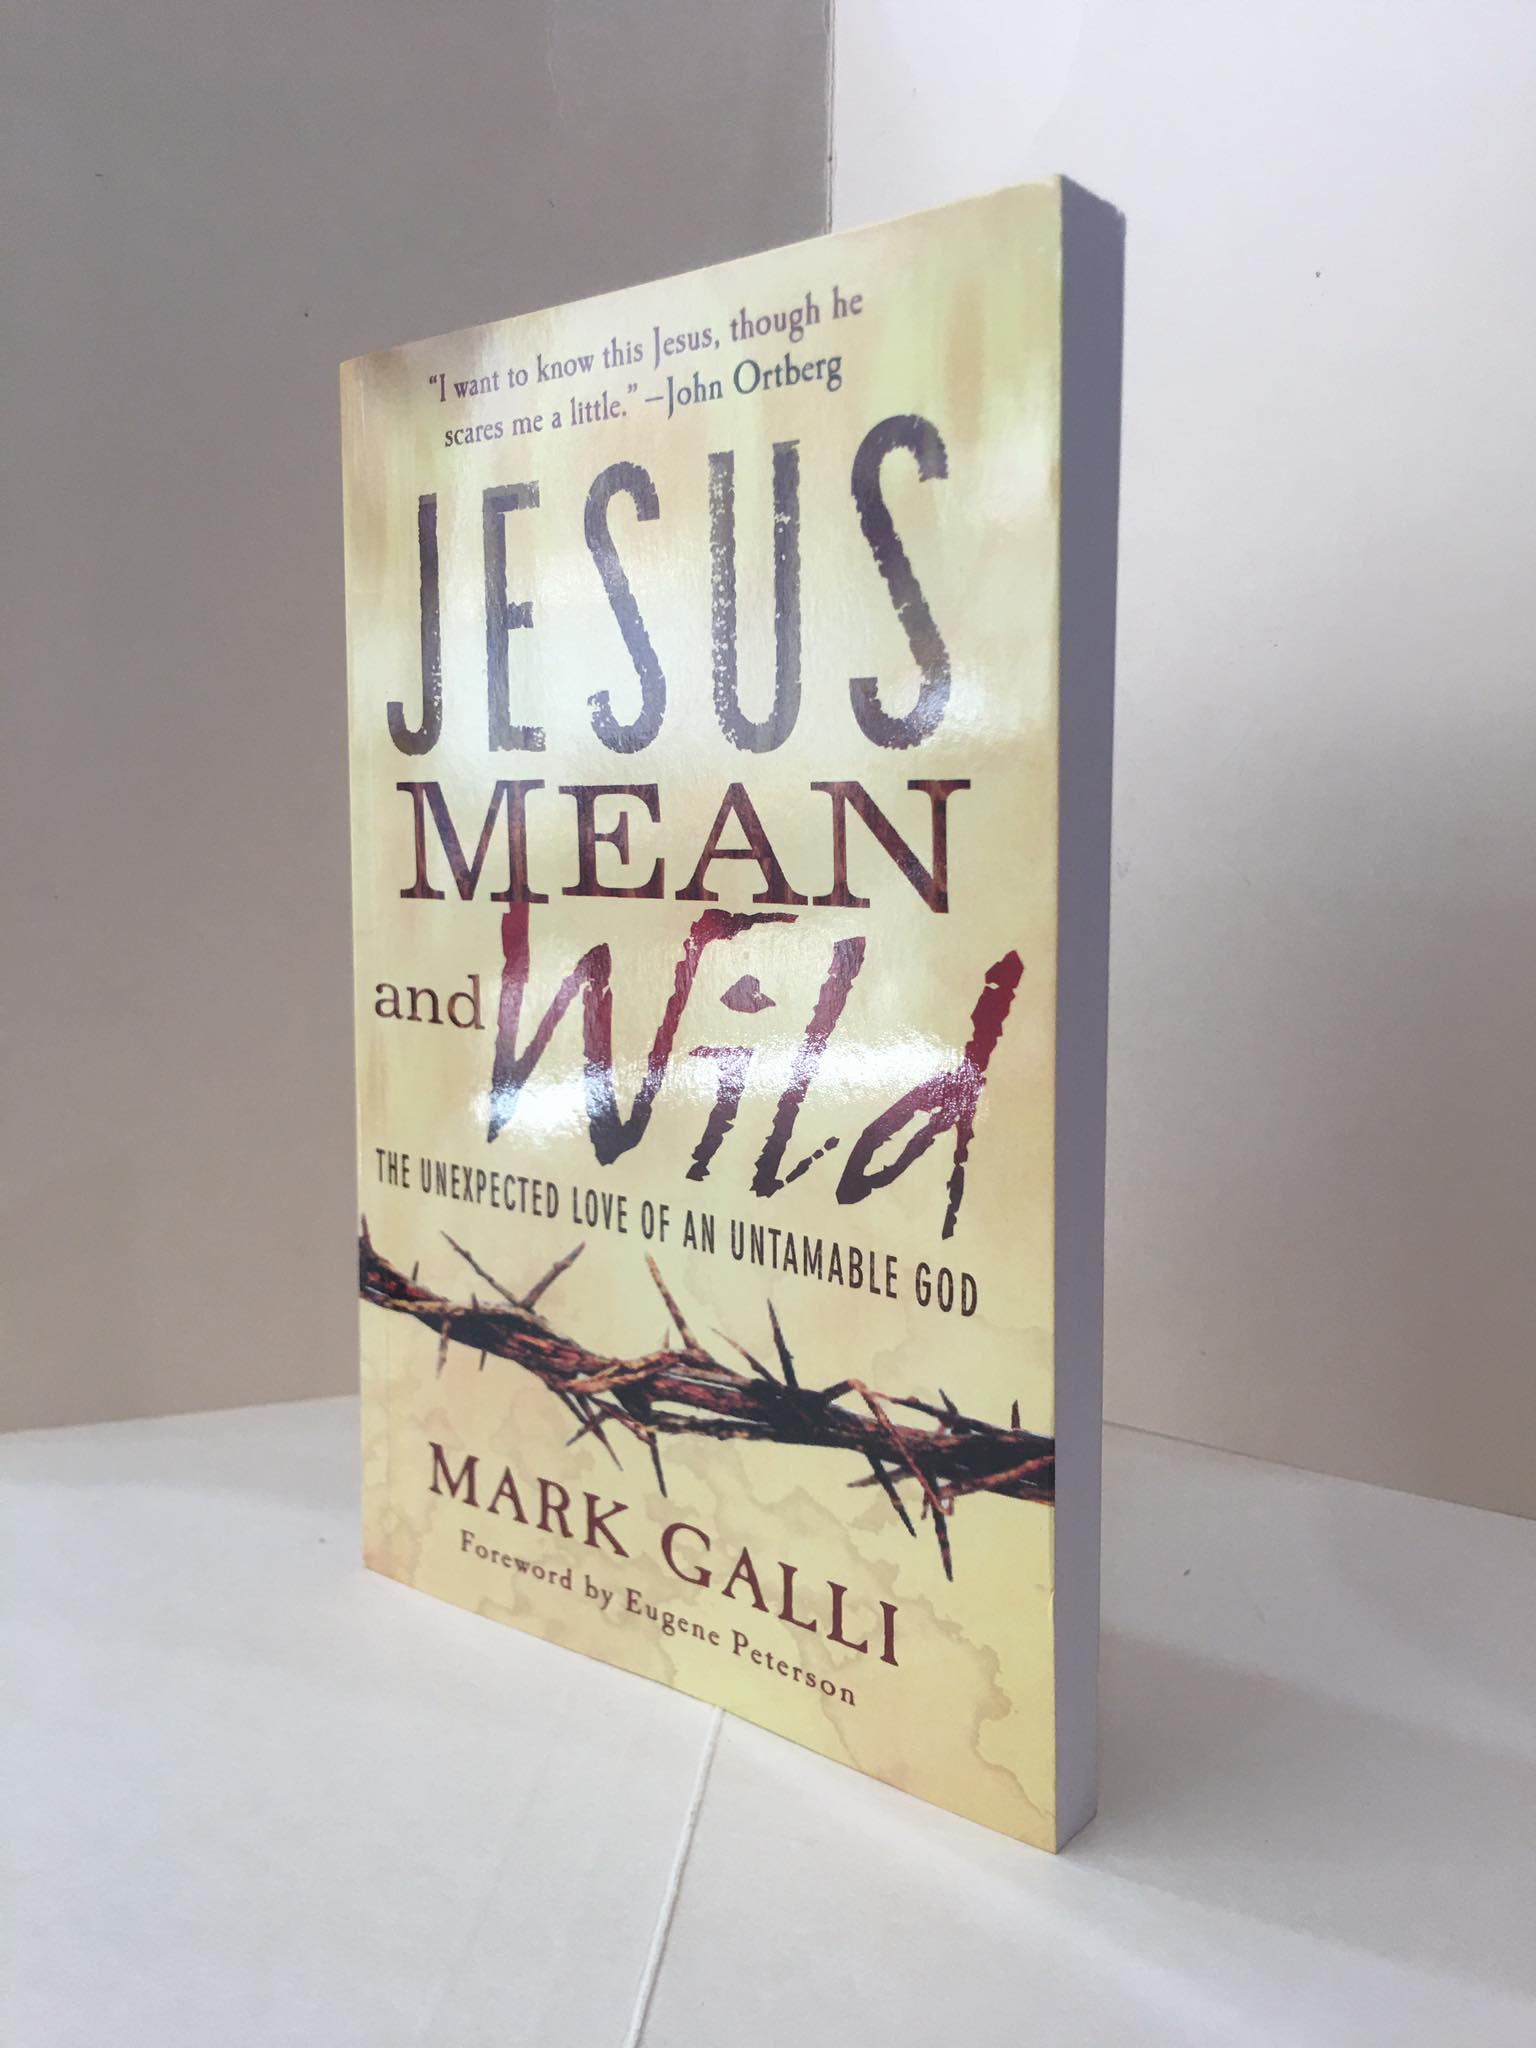 Jesus Mean and Wild: The Unexpected Love of an Untamable God